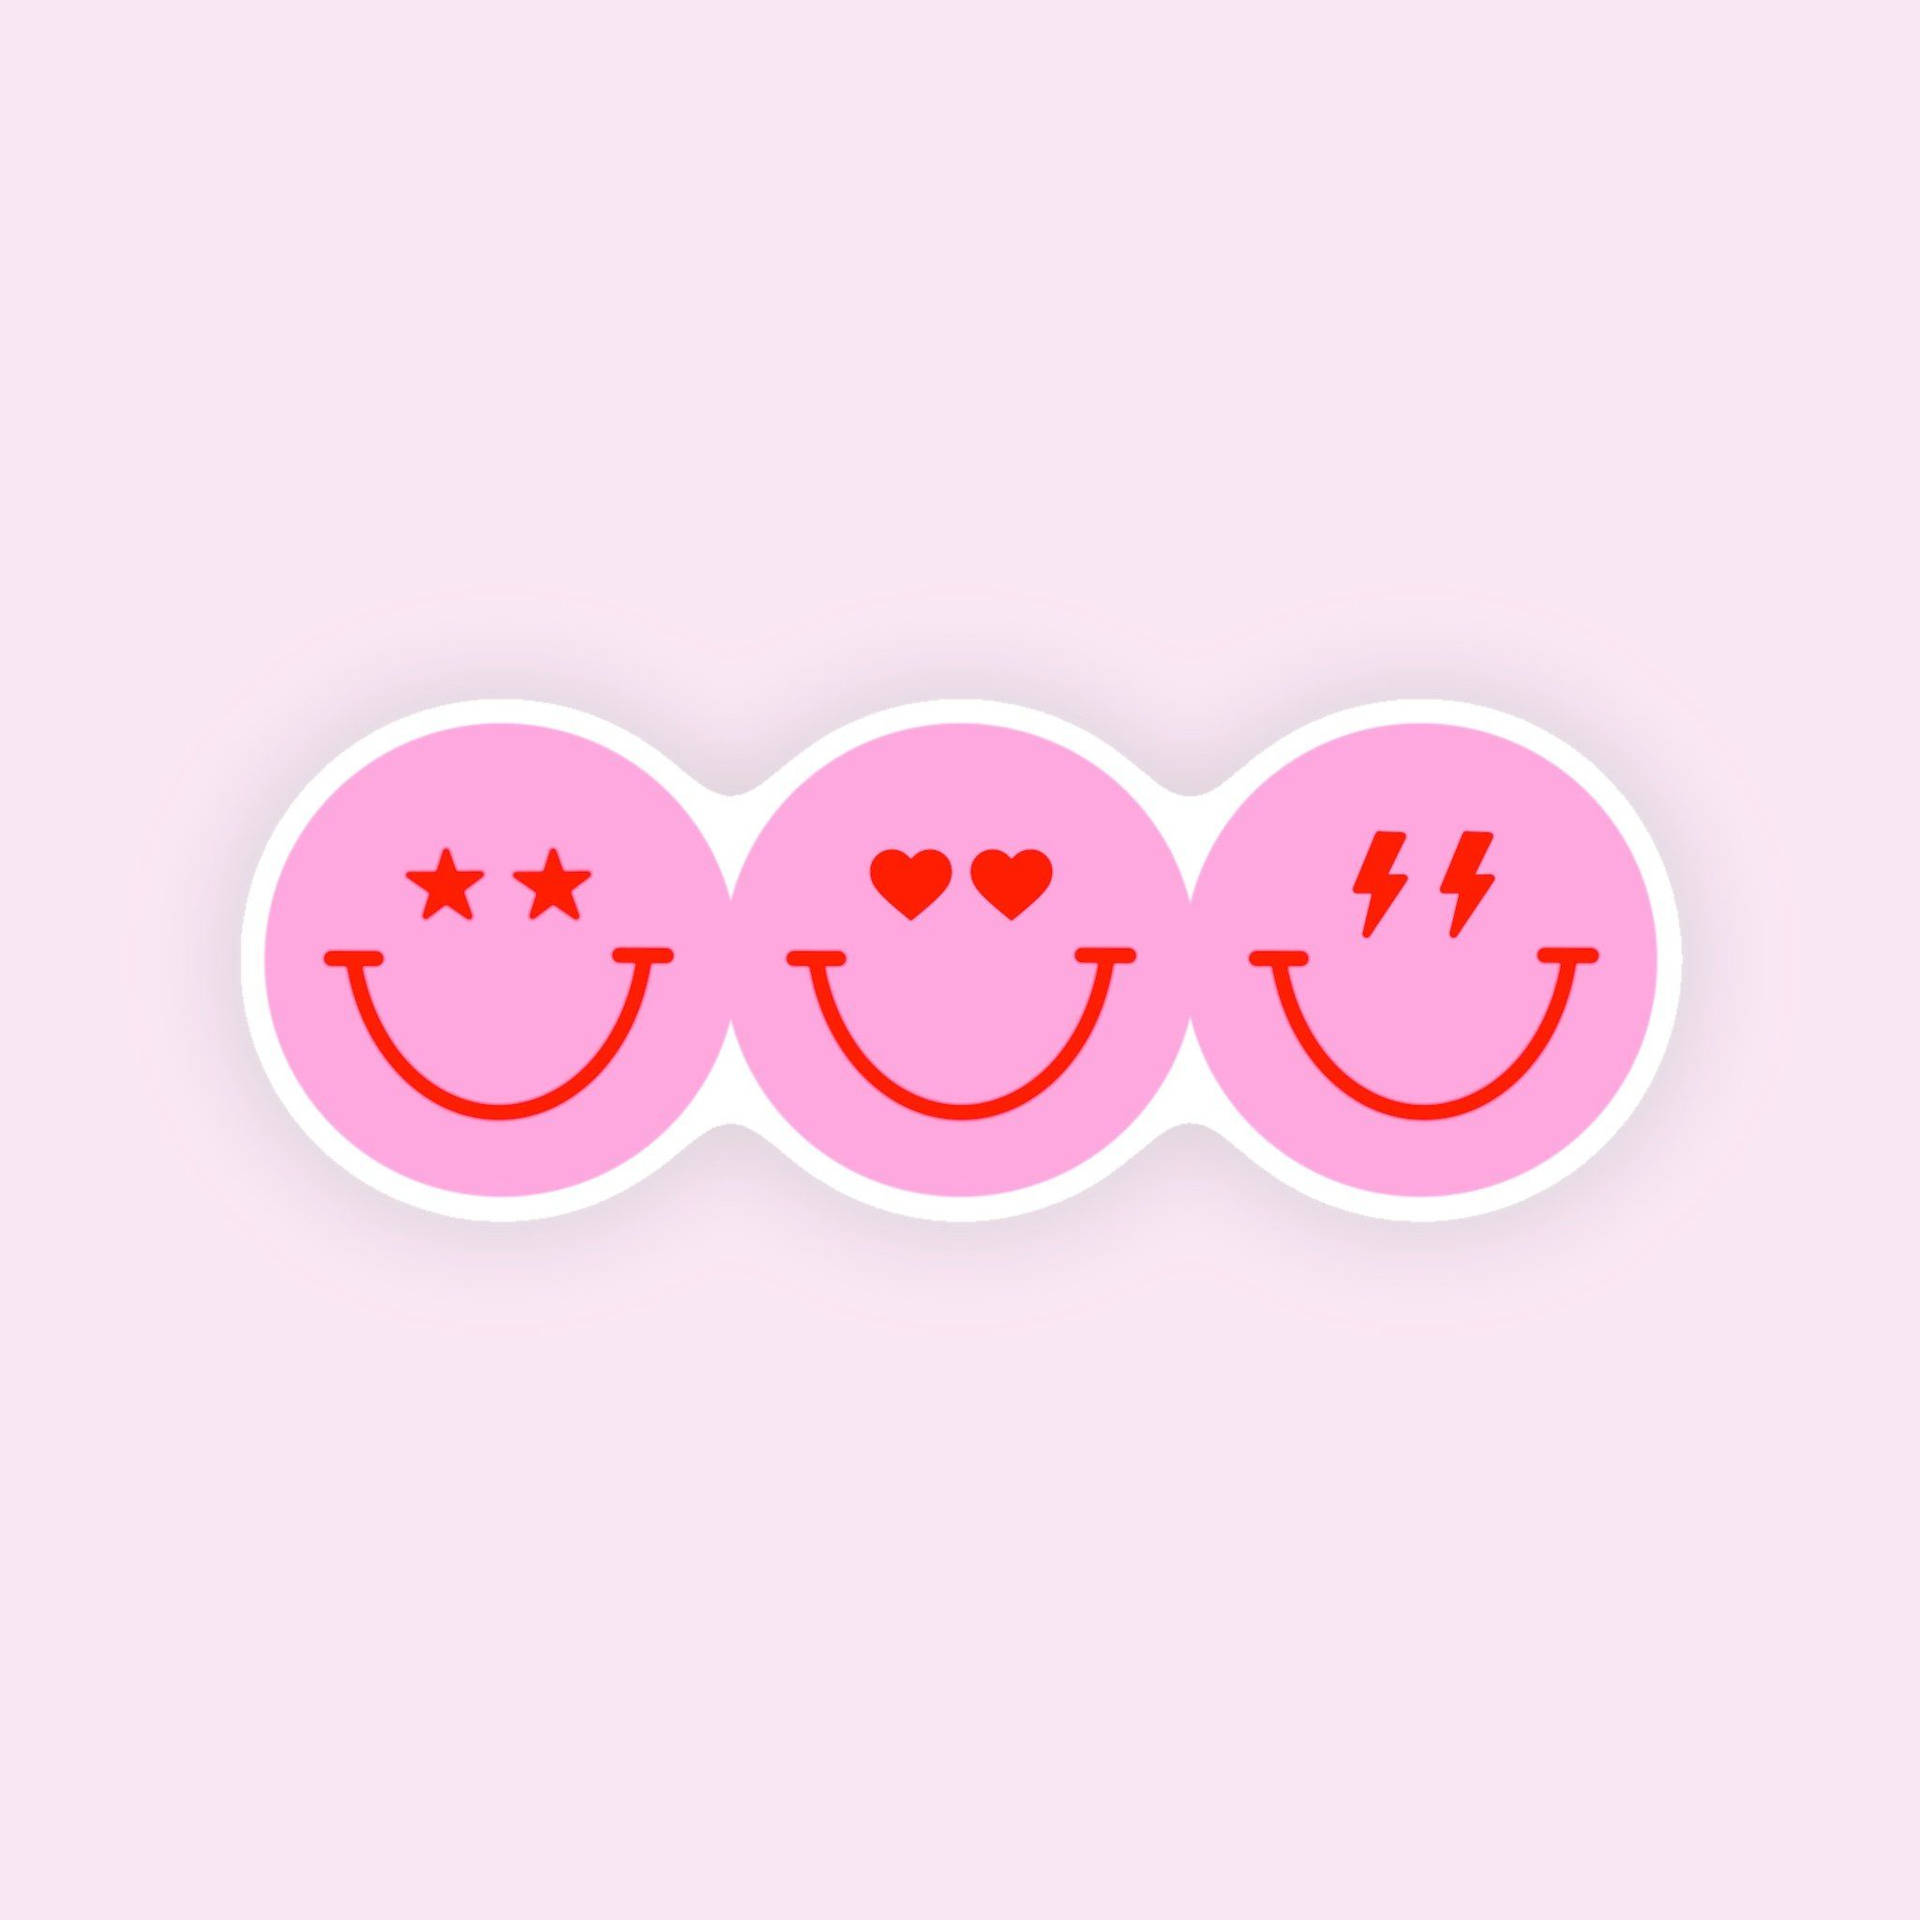 HD wallpaper pinkandwhite laughing emoticon ball lot Abstract 3D  Smiley  Wallpaper Flare